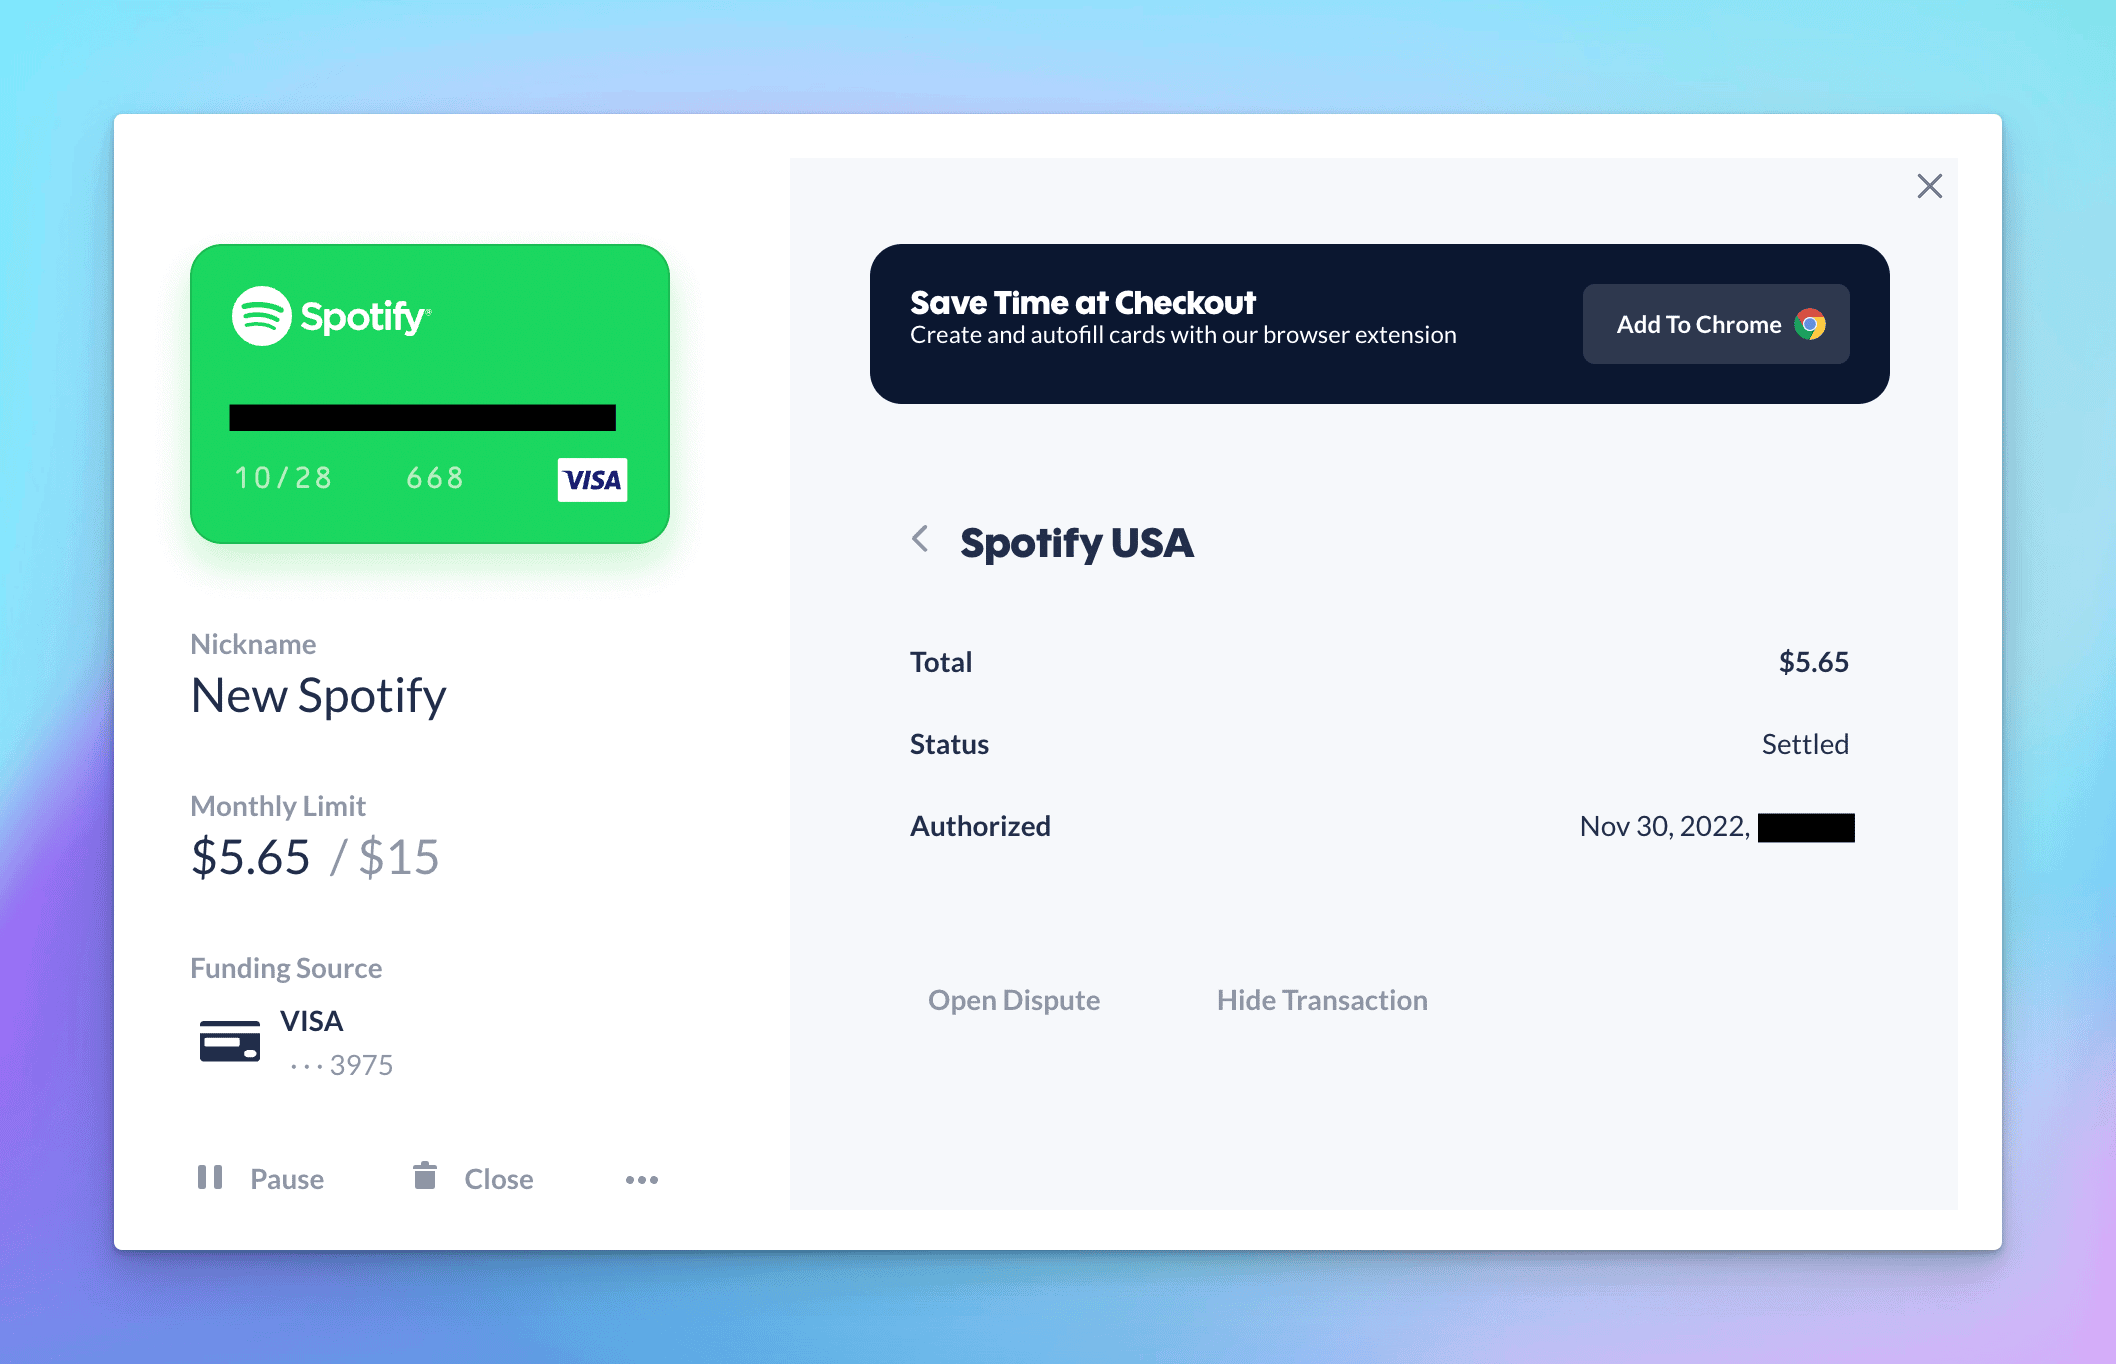 Sample card information of using Privacy.com to purchase a Spotify subscription